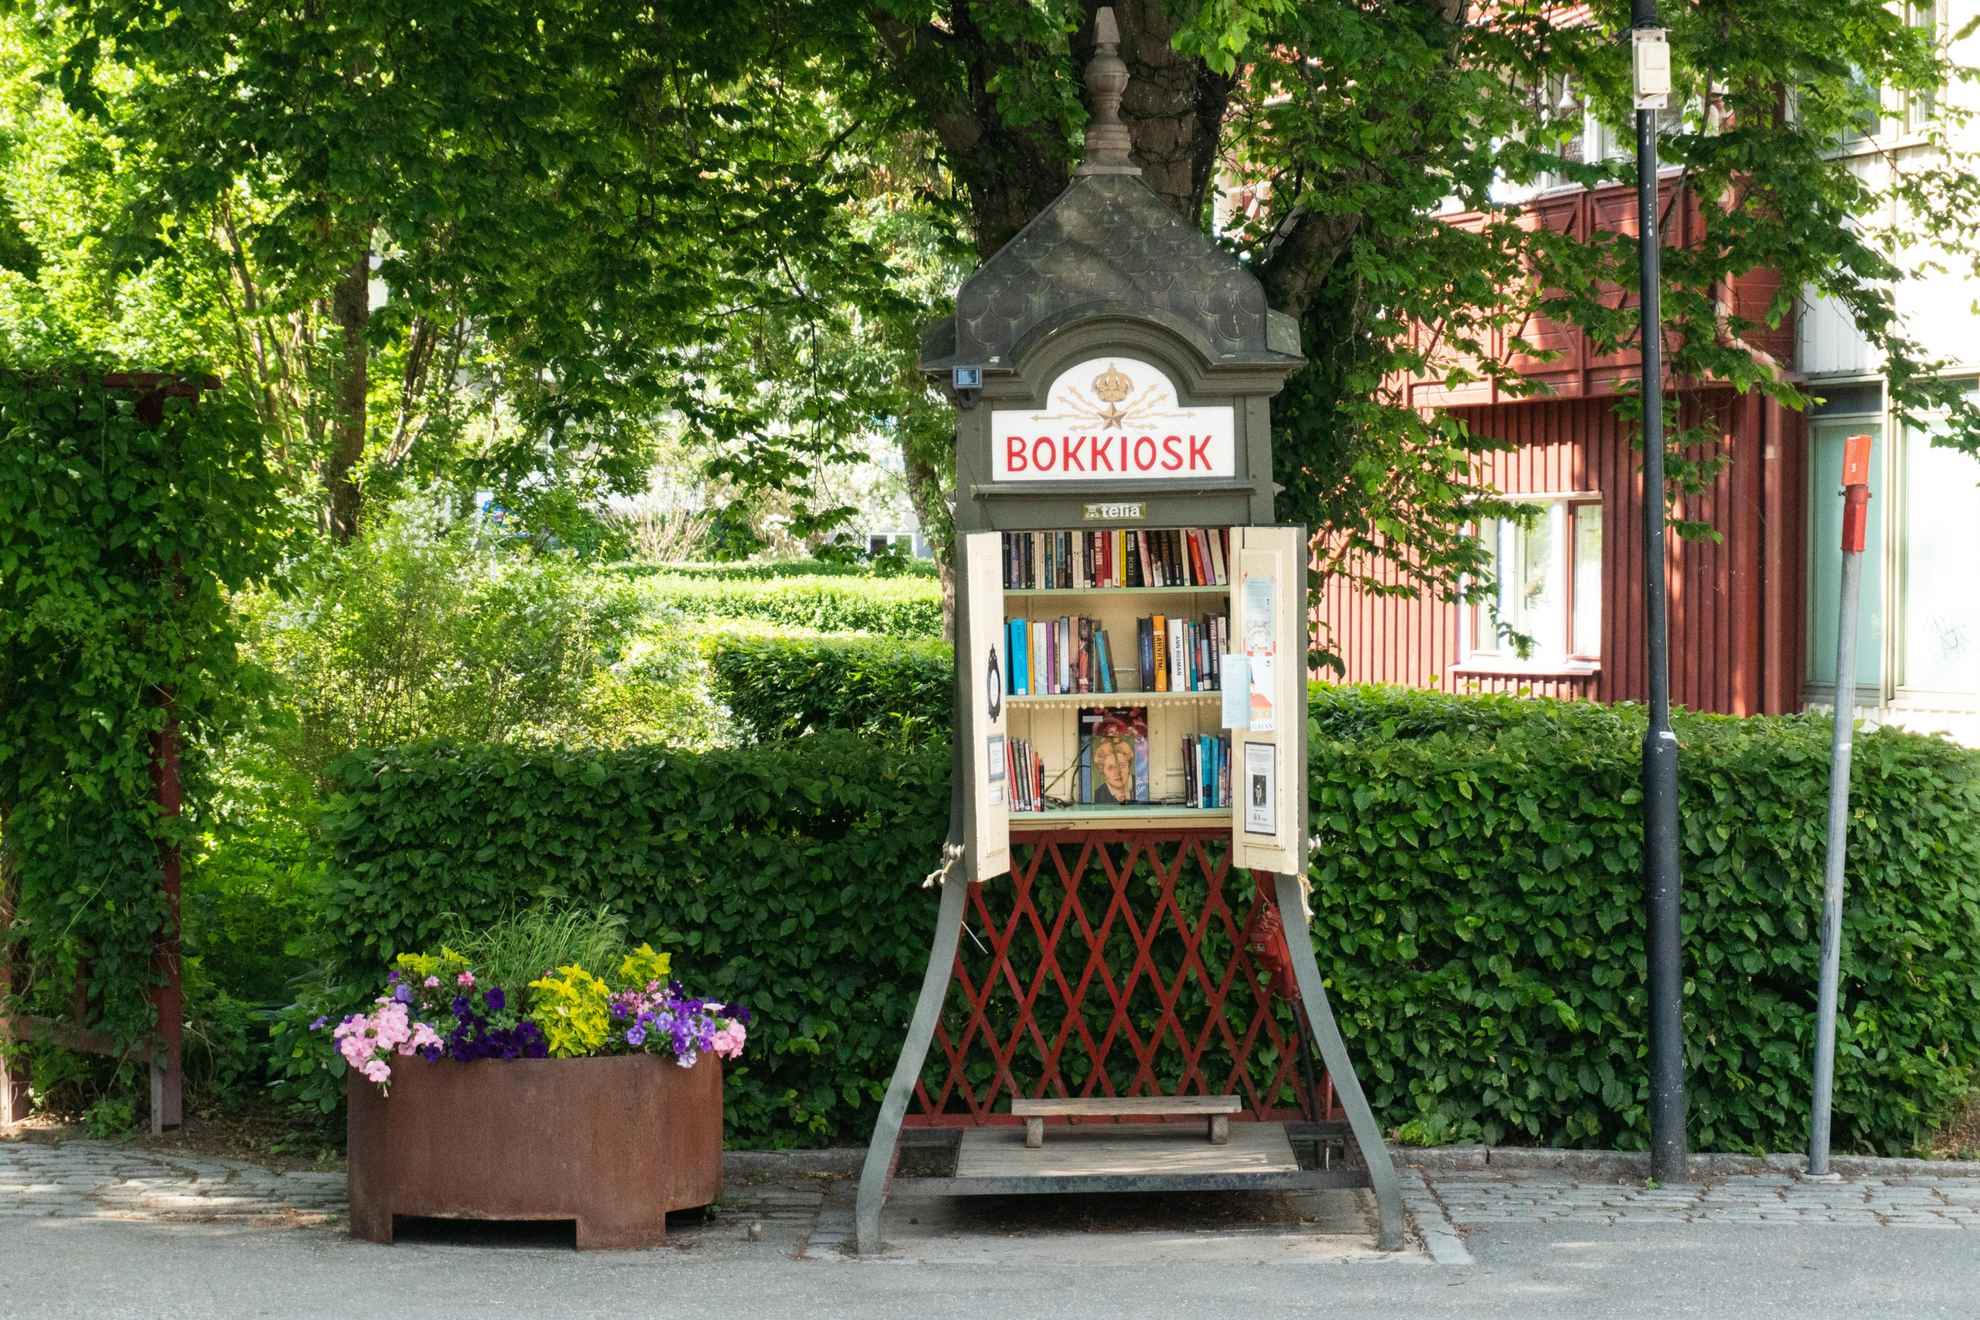 Sigtuna's book kiosk is a converted old telephone booth now serving as a small mini-library.